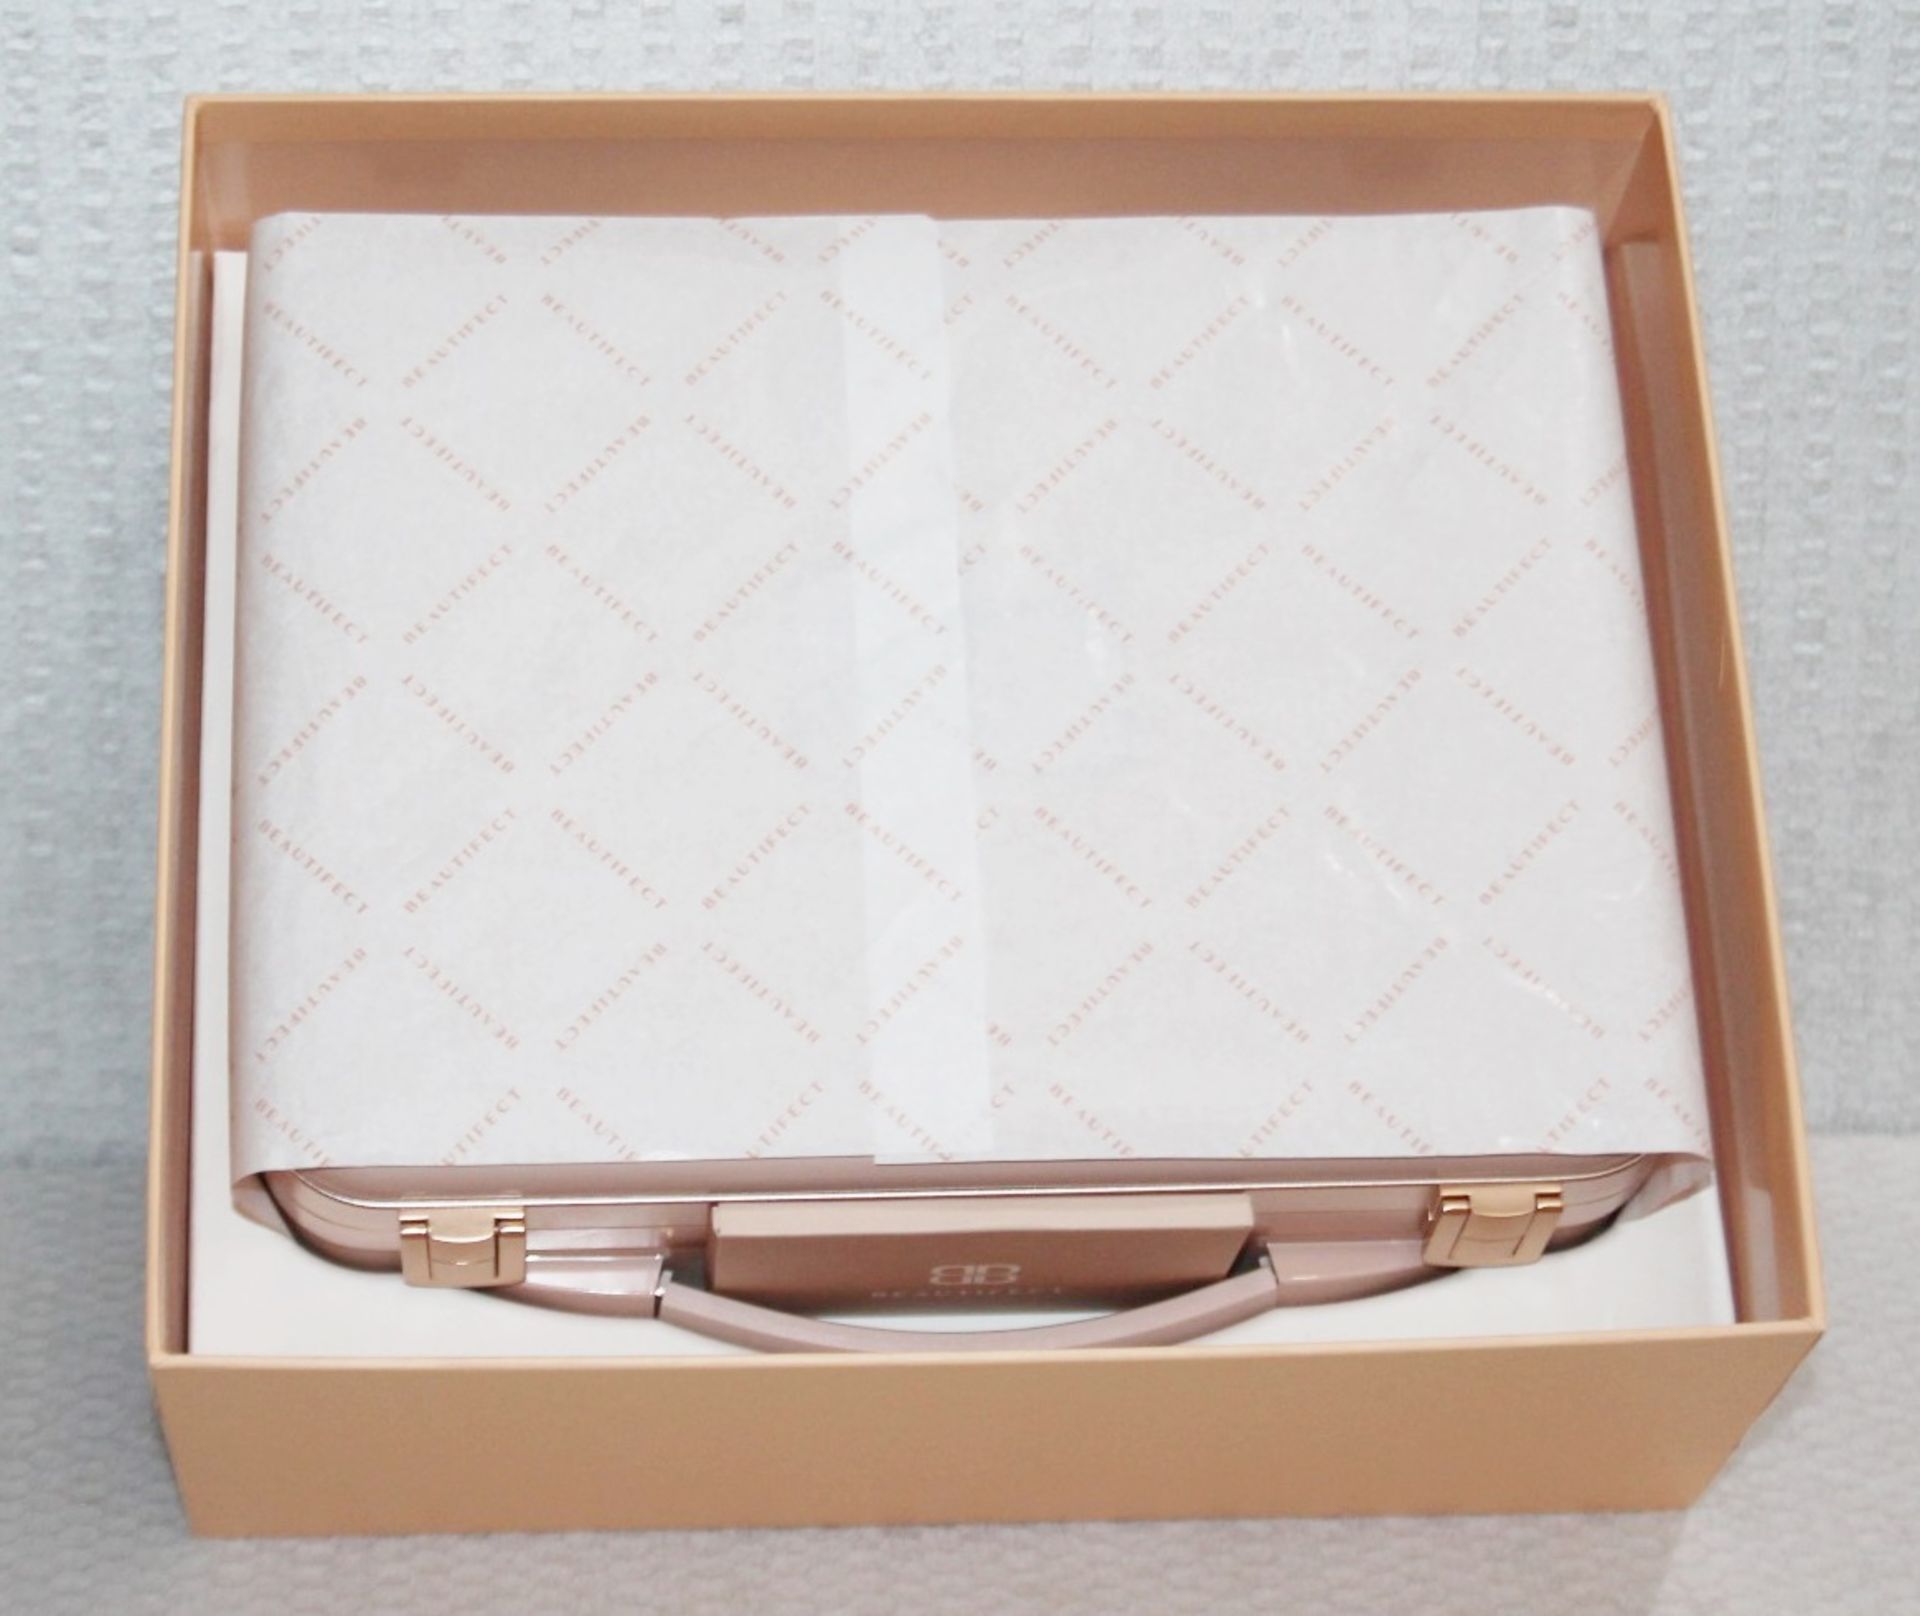 1 x BEAUTIFECT 'Beautifect Box' Make-Up Carry Case With Built-in Illuminated Mirror - RRP £279.00 - Image 5 of 11